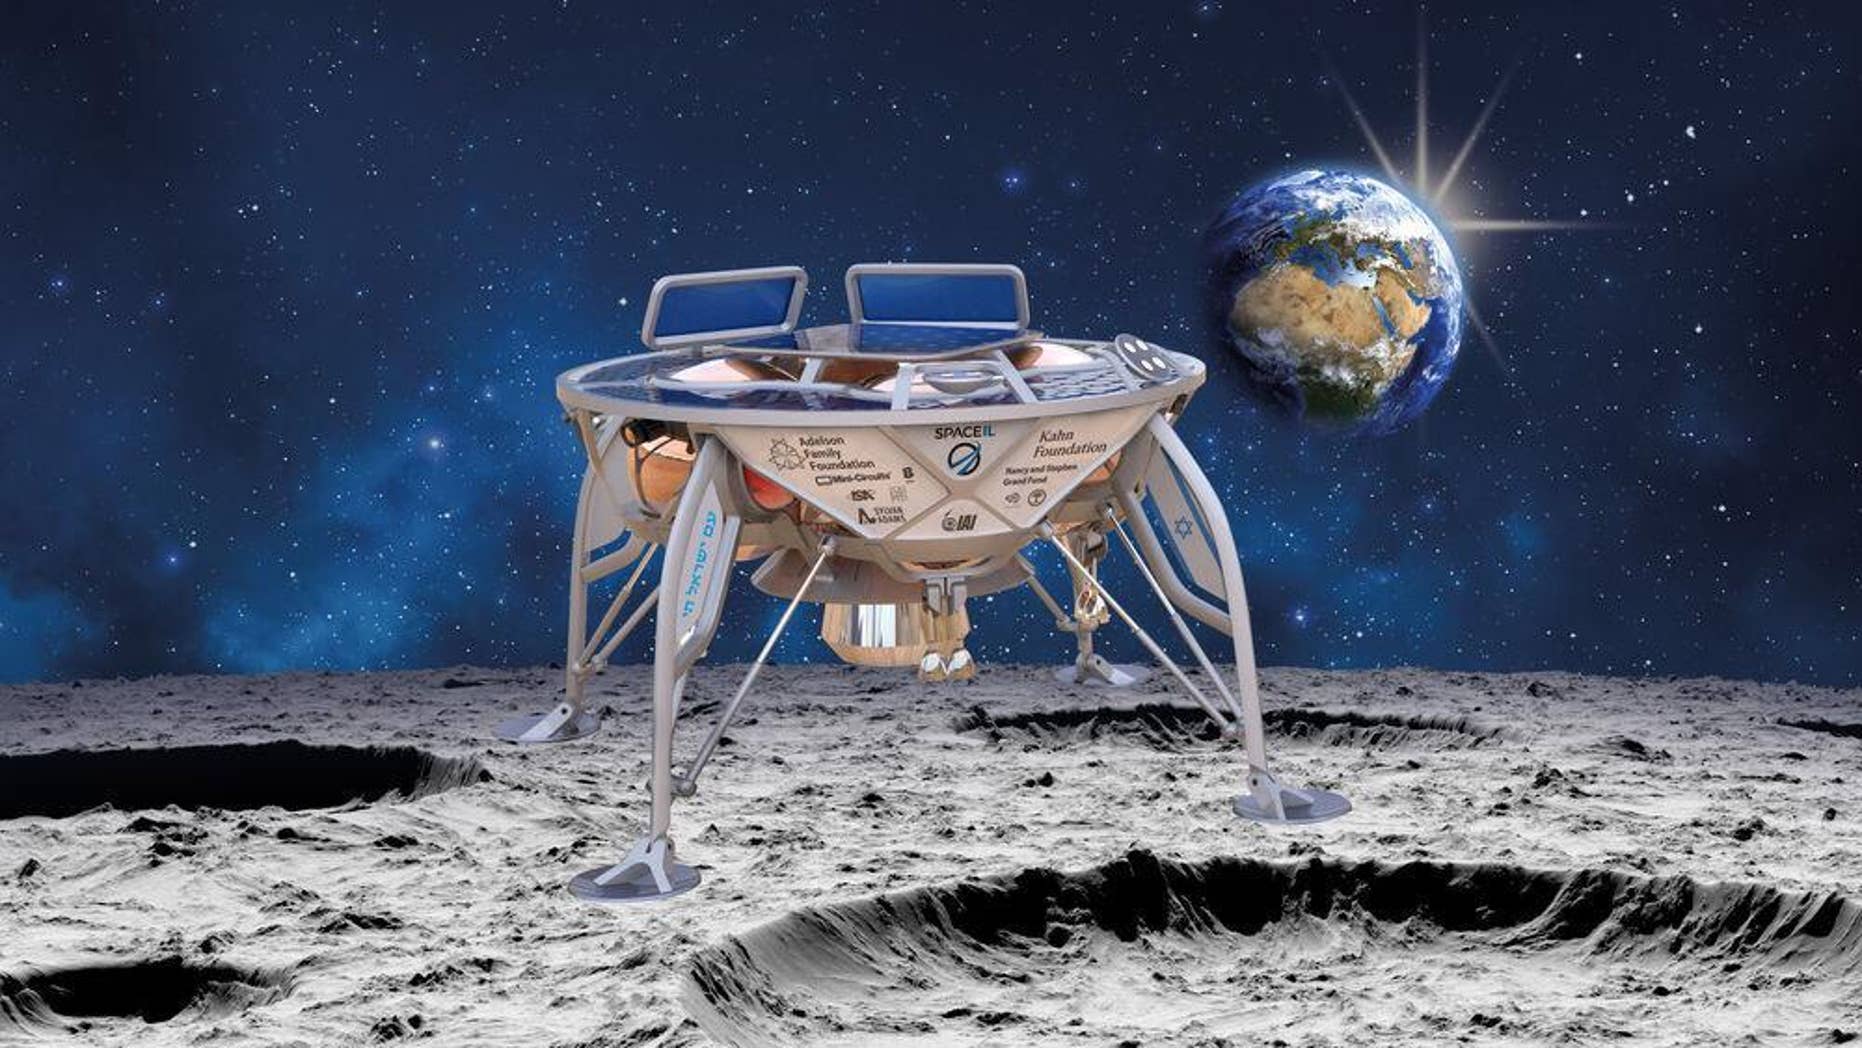 Israel preps historic mission to land on the Moon